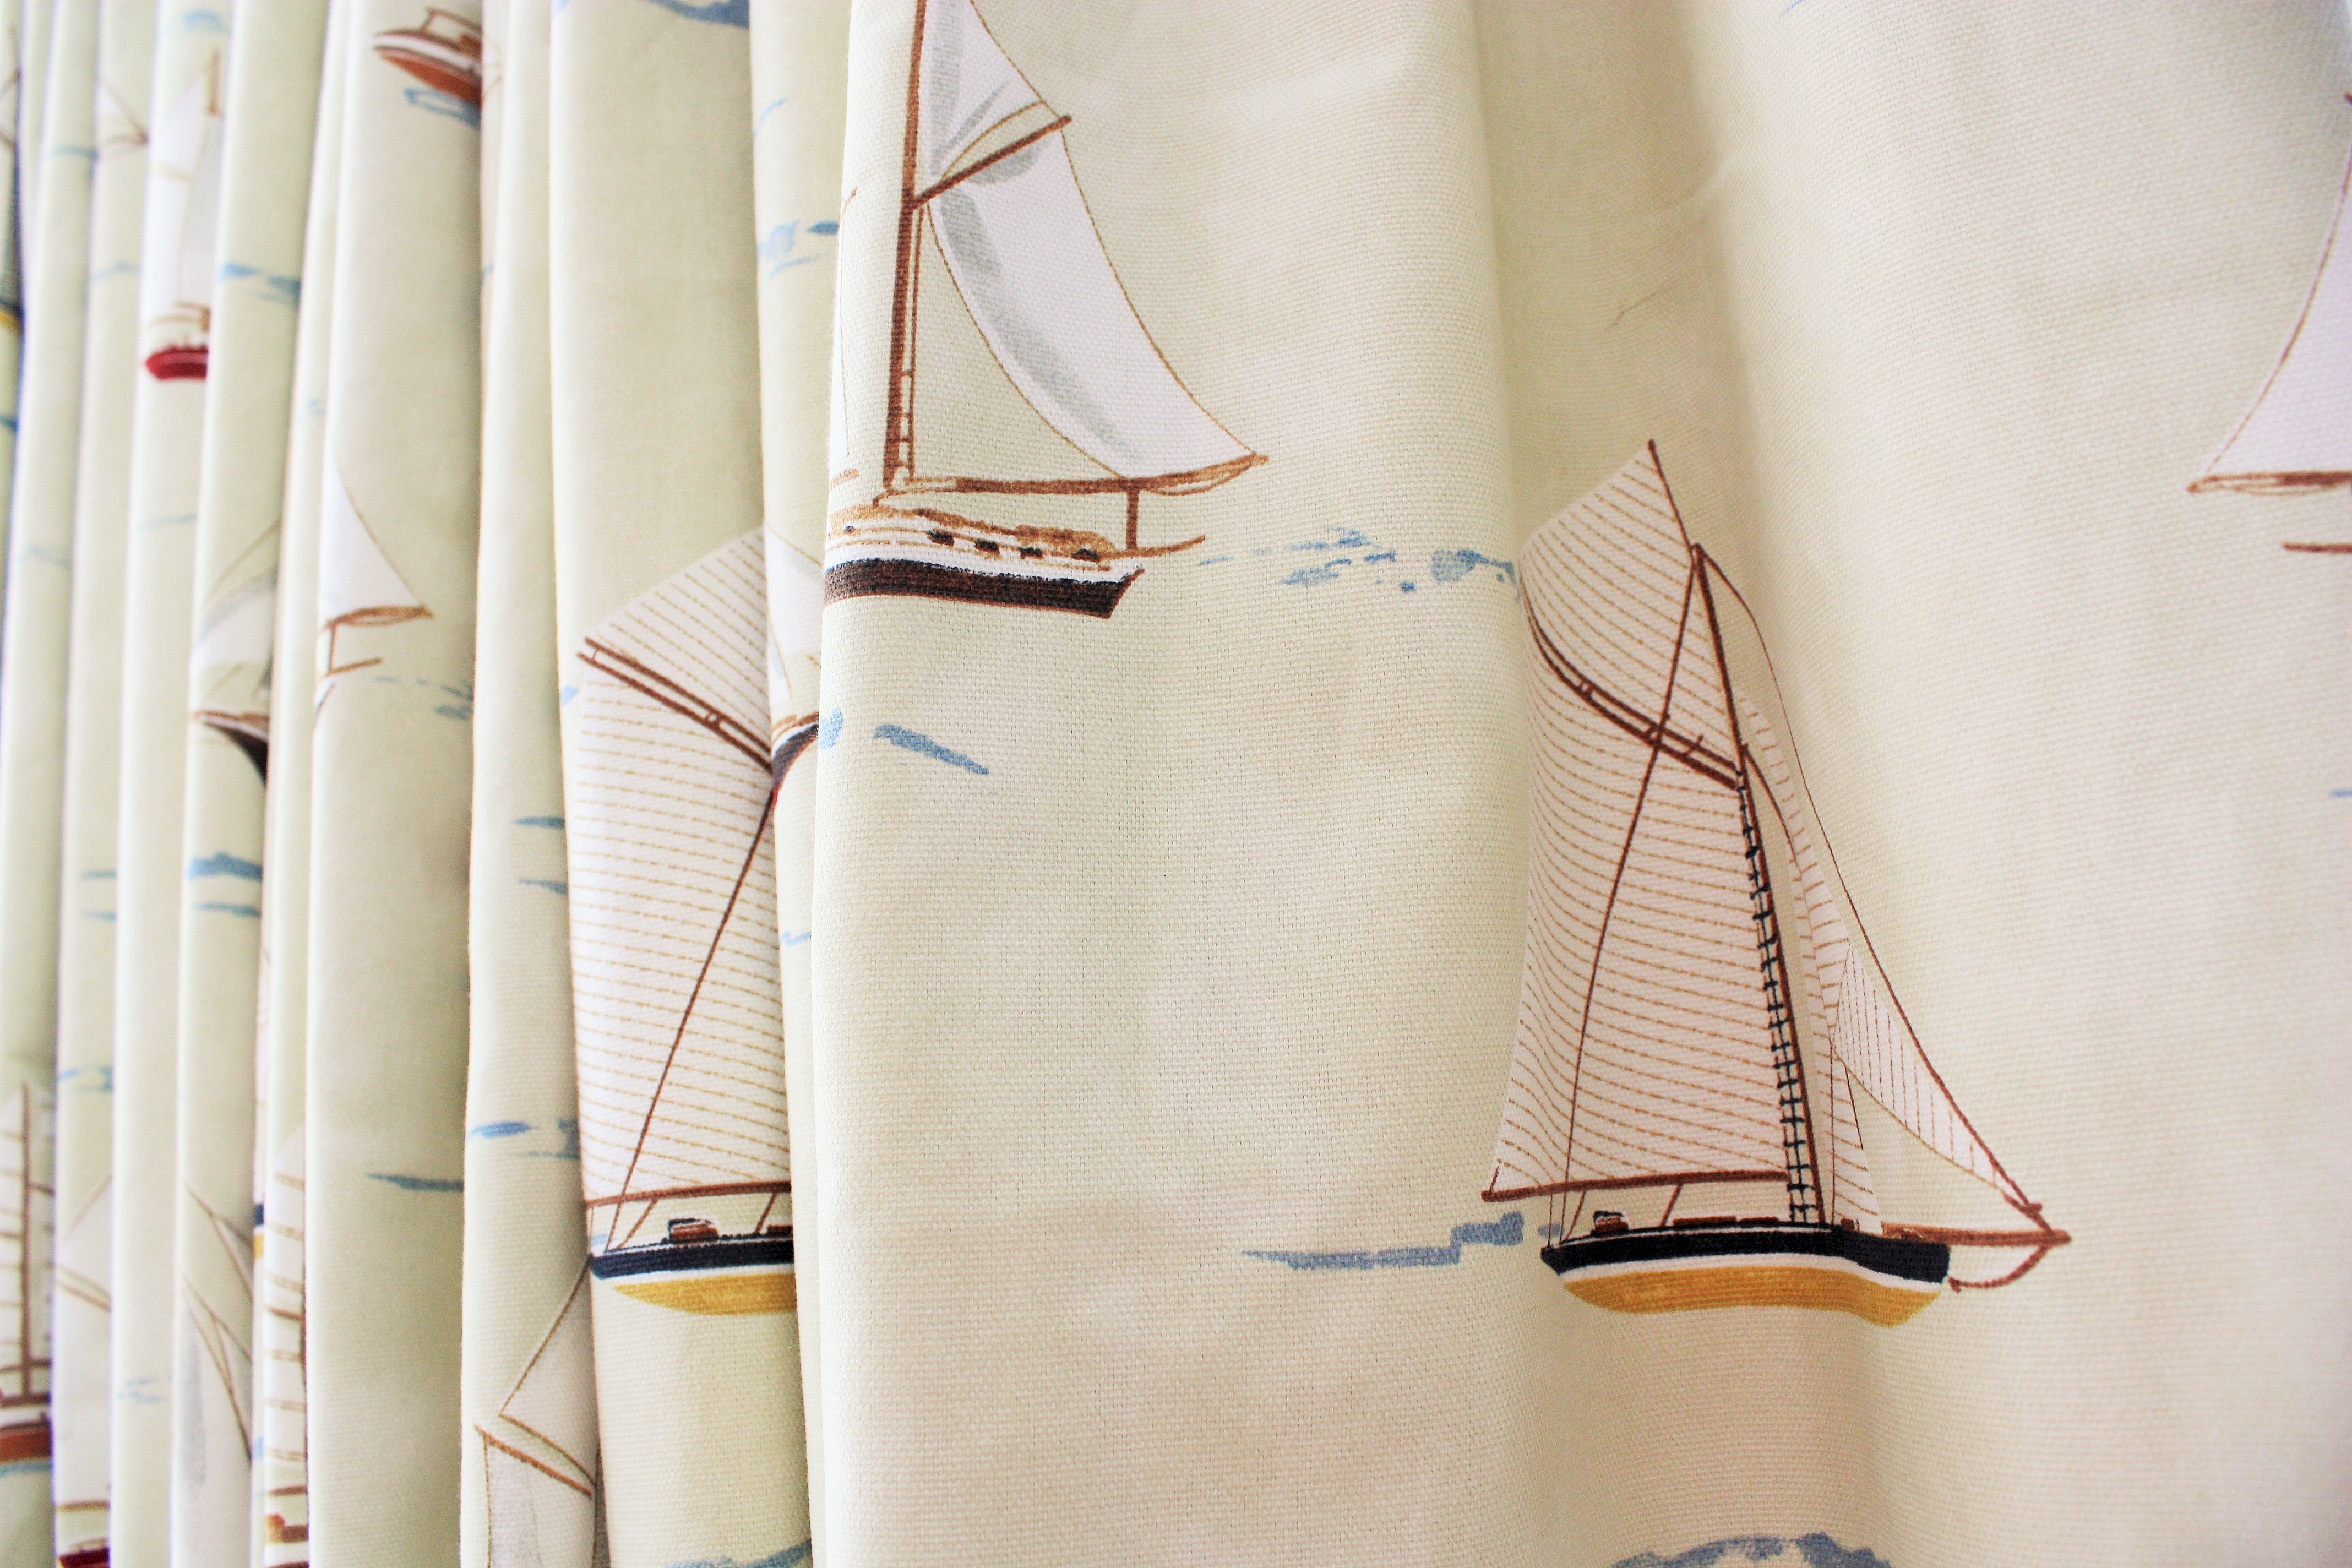 Coastal chic - new boaty curtains in the garden room